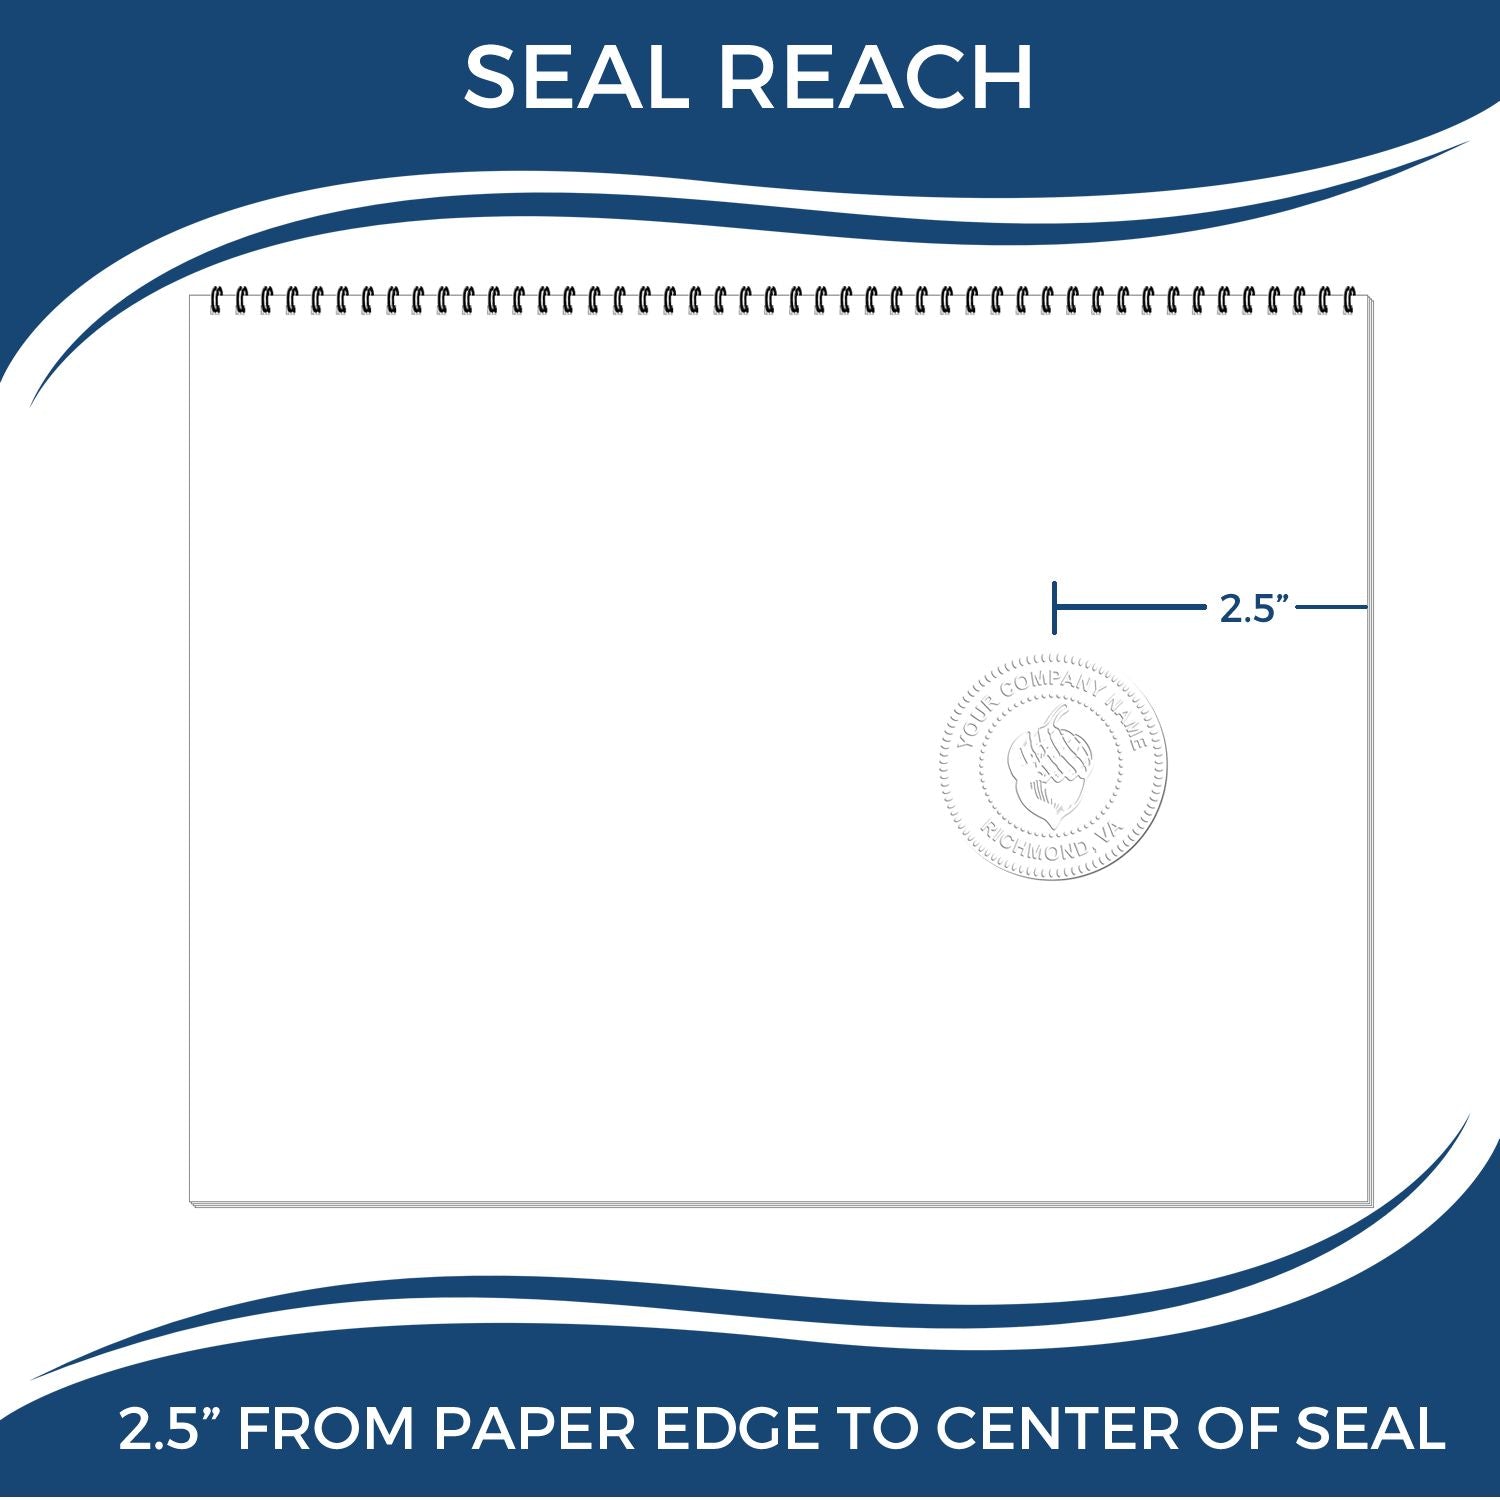 An infographic showing the seal reach which is represented by a ruler and a miniature seal image of the Long Reach North Carolina PE Seal